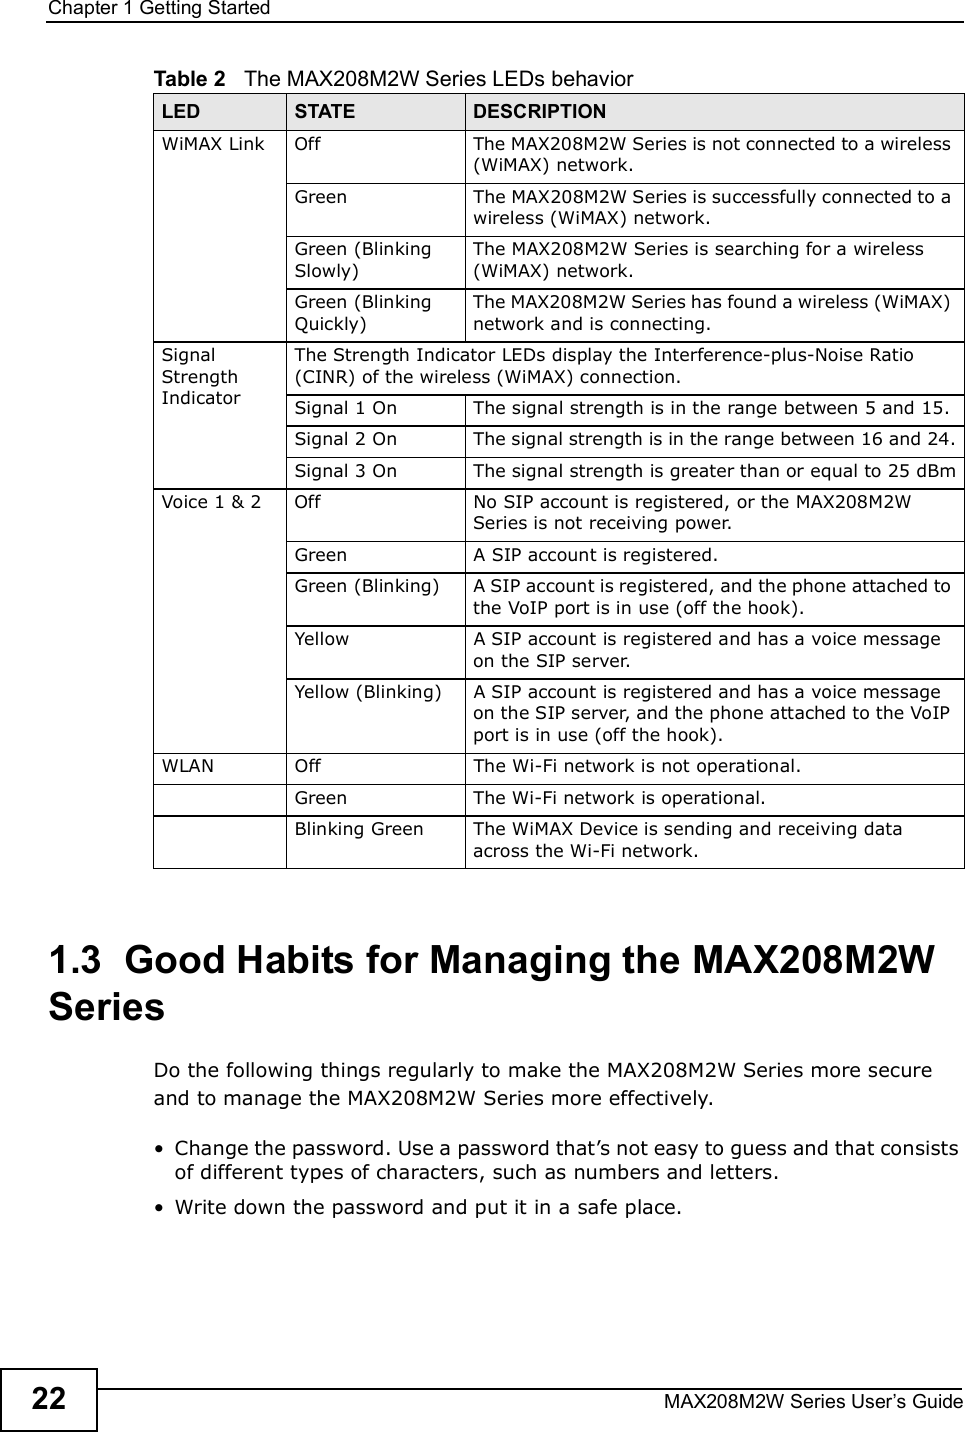 Chapter 1Getting StartedMAX208M2W Series User s Guide221.3  Good Habits for Managing the MAX208M2W SeriesDo the following things regularly to make the MAX208M2W Series more secure and to manage the MAX208M2W Series more effectively.!Change the password. Use a password that s not easy to guess and that consists of different types of characters, such as numbers and letters.!Write down the password and put it in a safe place.WiMAX LinkOffThe MAX208M2W Series is not connected to a wireless (WiMAX) network.GreenThe MAX208M2W Series is successfully connected to a wireless (WiMAX) network.Green (Blinking Slowly)The MAX208M2W Series is searching for a wireless (WiMAX) network.Green (Blinking Quickly)The MAX208M2W Series has found a wireless (WiMAX) network and is connecting.Signal Strength IndicatorThe Strength Indicator LEDs display the Interference-plus-Noise Ratio (CINR) of the wireless (WiMAX) connection.Signal 1 OnThe signal strength is in the range between 5 and 15.Signal 2 OnThe signal strength is in the range between 16 and 24.Signal 3 OnThe signal strength is greater than or equal to 25 dBmVoice 1 &amp; 2OffNo SIP account is registered, or the MAX208M2W Series is not receiving power.GreenA SIP account is registered.Green (Blinking)A SIP account is registered, and the phone attached to the VoIP port is in use (off the hook).YellowA SIP account is registered and has a voice message on the SIP server.Yellow (Blinking)A SIP account is registered and has a voice message on the SIP server, and the phone attached to the VoIP port is in use (off the hook).WLANOffThe Wi-Fi network is not operational.GreenThe Wi-Fi network is operational.Blinking GreenThe WiMAX Device is sending and receiving data across the Wi-Fi network.Table 2   The MAX208M2W Series LEDs behaviorLED STATE DESCRIPTION